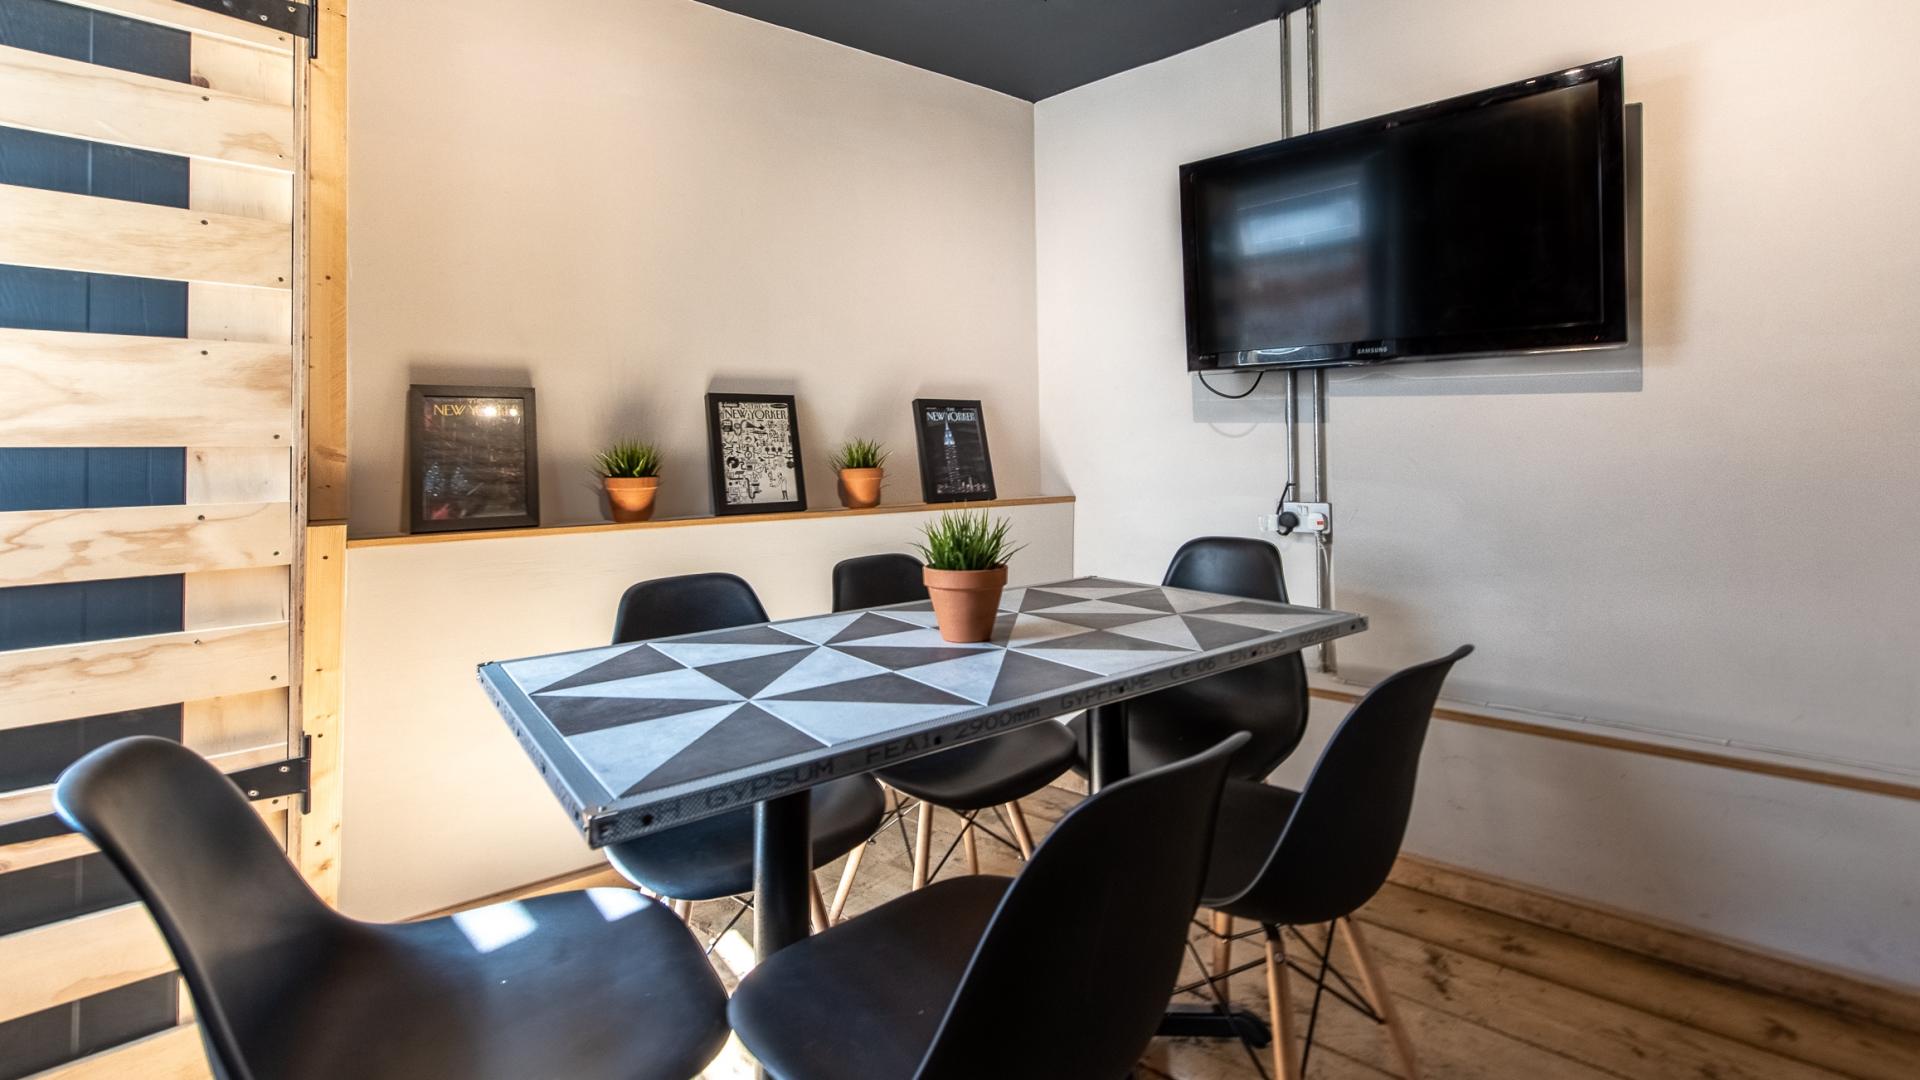 Meeting Rooms for Hire in North York, ON